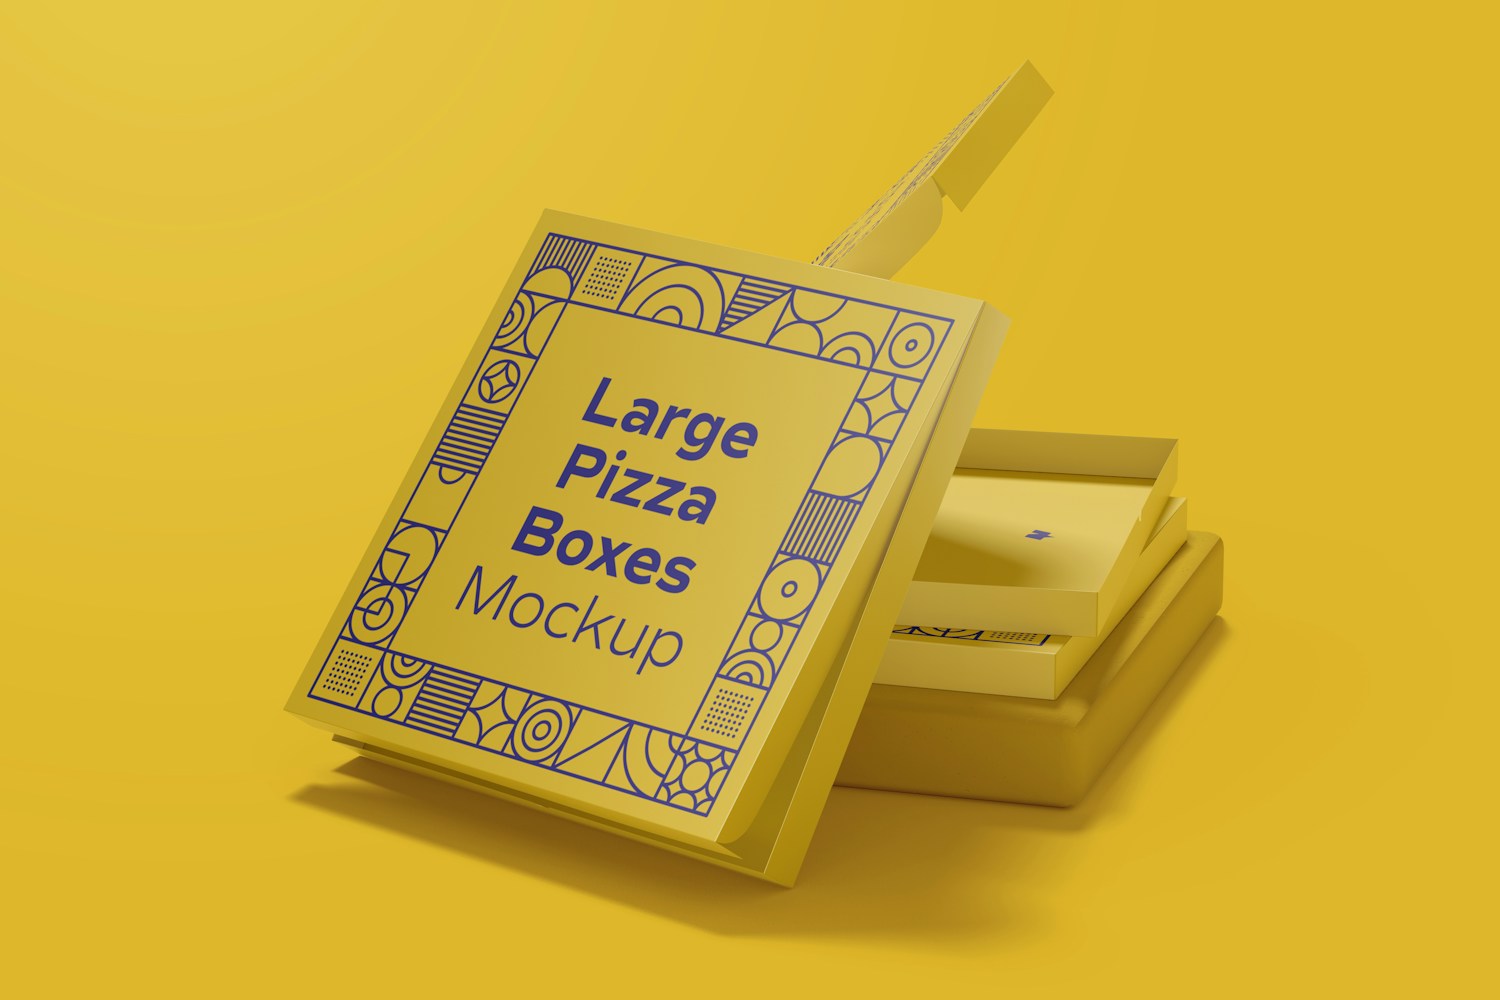 Large Pizza Boxes Mockup, Stacked